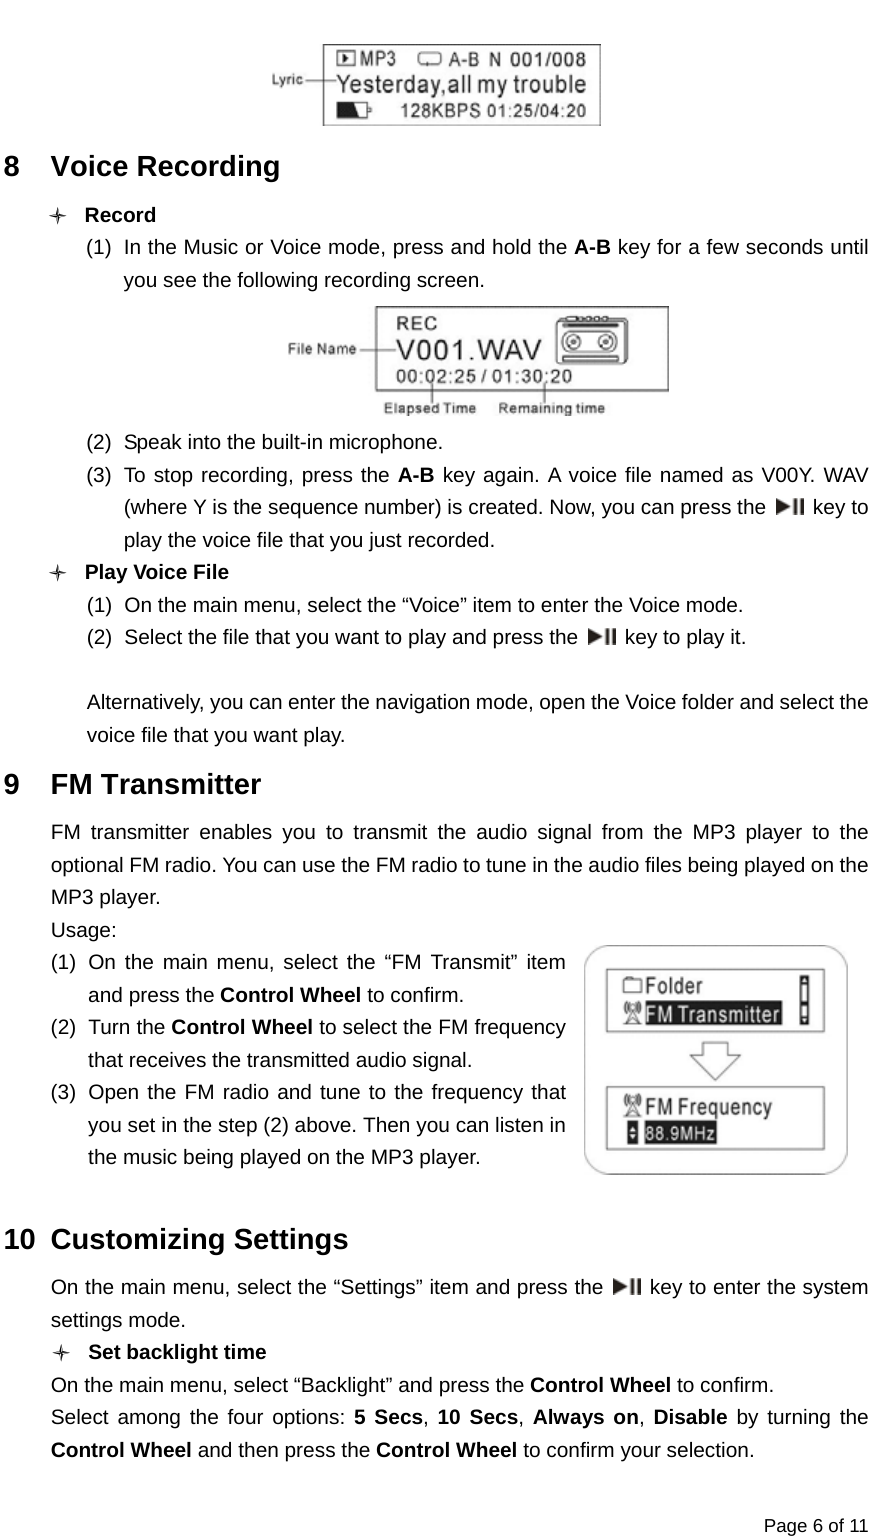  Page 6 of 11  8 Voice Recording O Record (1)  In the Music or Voice mode, press and hold the A-B key for a few seconds until you see the following recording screen.  (2)  Speak into the built-in microphone. (3)  To stop recording, press the A-B key again. A voice file named as V00Y. WAV (where Y is the sequence number) is created. Now, you can press the   key to play the voice file that you just recorded. O Play Voice File (1)  On the main menu, select the “Voice” item to enter the Voice mode.   (2)  Select the file that you want to play and press the   key to play it.  Alternatively, you can enter the navigation mode, open the Voice folder and select the voice file that you want play.   9 FM Transmitter FM transmitter enables you to transmit the audio signal from the MP3 player to the optional FM radio. You can use the FM radio to tune in the audio files being played on the MP3 player. Usage: (1) On the main menu, select the “FM Transmit” item and press the Control Wheel to confirm. (2) Turn the Control Wheel to select the FM frequency that receives the transmitted audio signal. (3)  Open the FM radio and tune to the frequency that you set in the step (2) above. Then you can listen in the music being played on the MP3 player.    10 Customizing Settings On the main menu, select the “Settings” item and press the   key to enter the system settings mode.   O Set backlight time On the main menu, select “Backlight” and press the Control Wheel to confirm. Select among the four options: 5 Secs, 10 Secs, Always on, Disable by turning the Control Wheel and then press the Control Wheel to confirm your selection. 